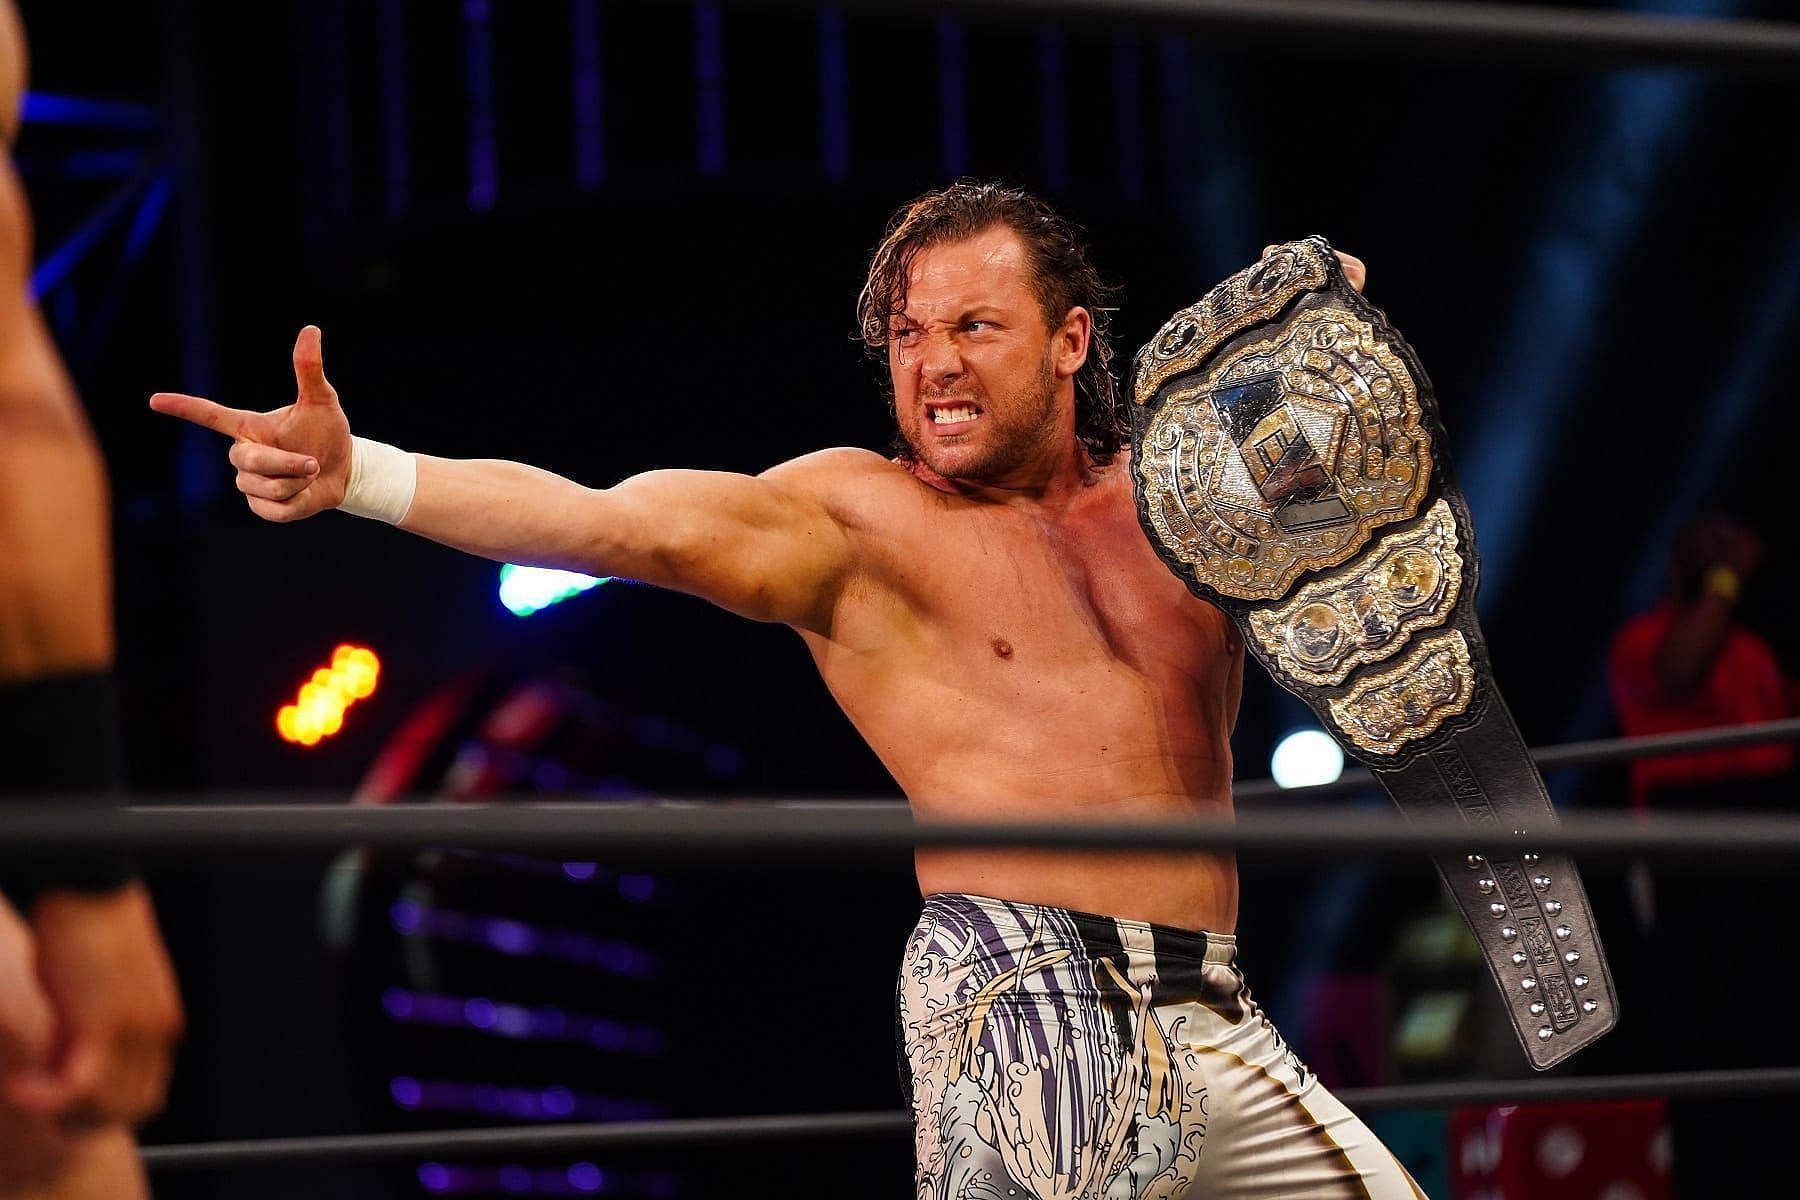 Kenny Omega posing with the world title at an AEW show.